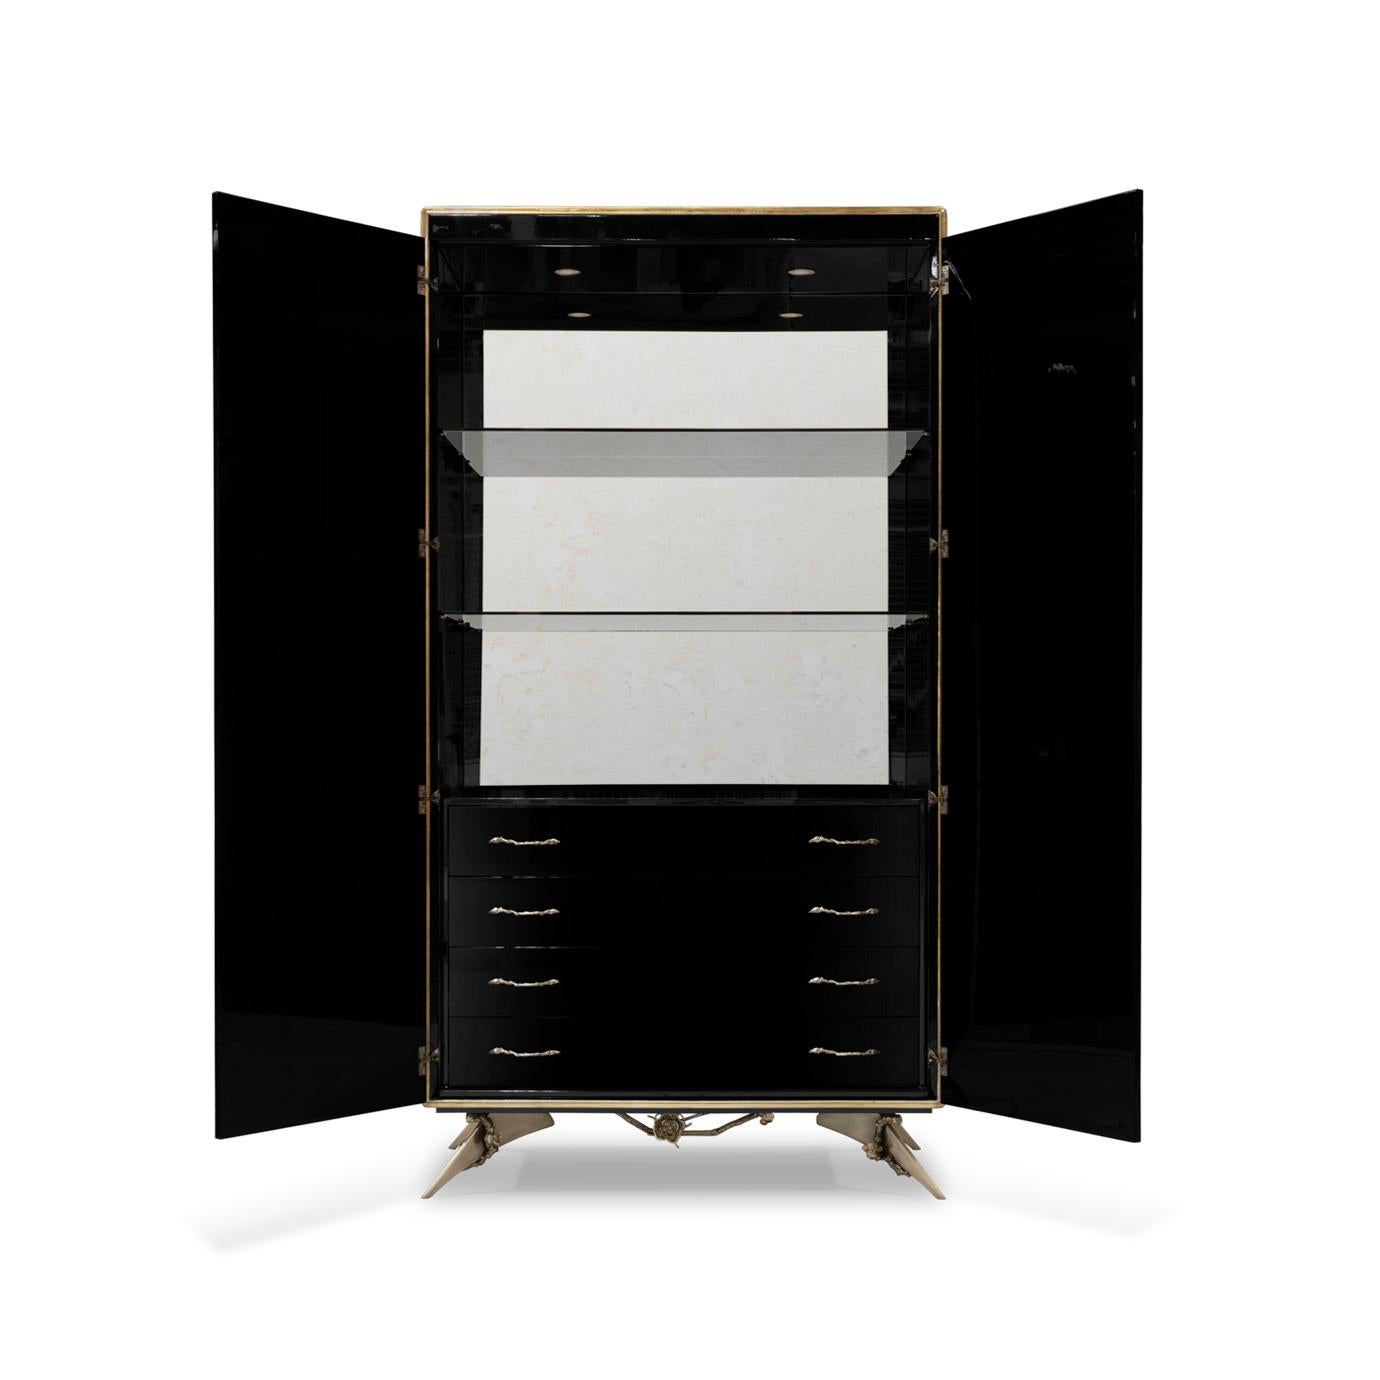 There is a sense of reveal and conceal as KOKET takes a beautiful armoire in high gloss lacquer and adorns it in metal organic lace, revealing a mesmerizing hint of what lies beneath. The stunning interior opens to an antique mirror back with two